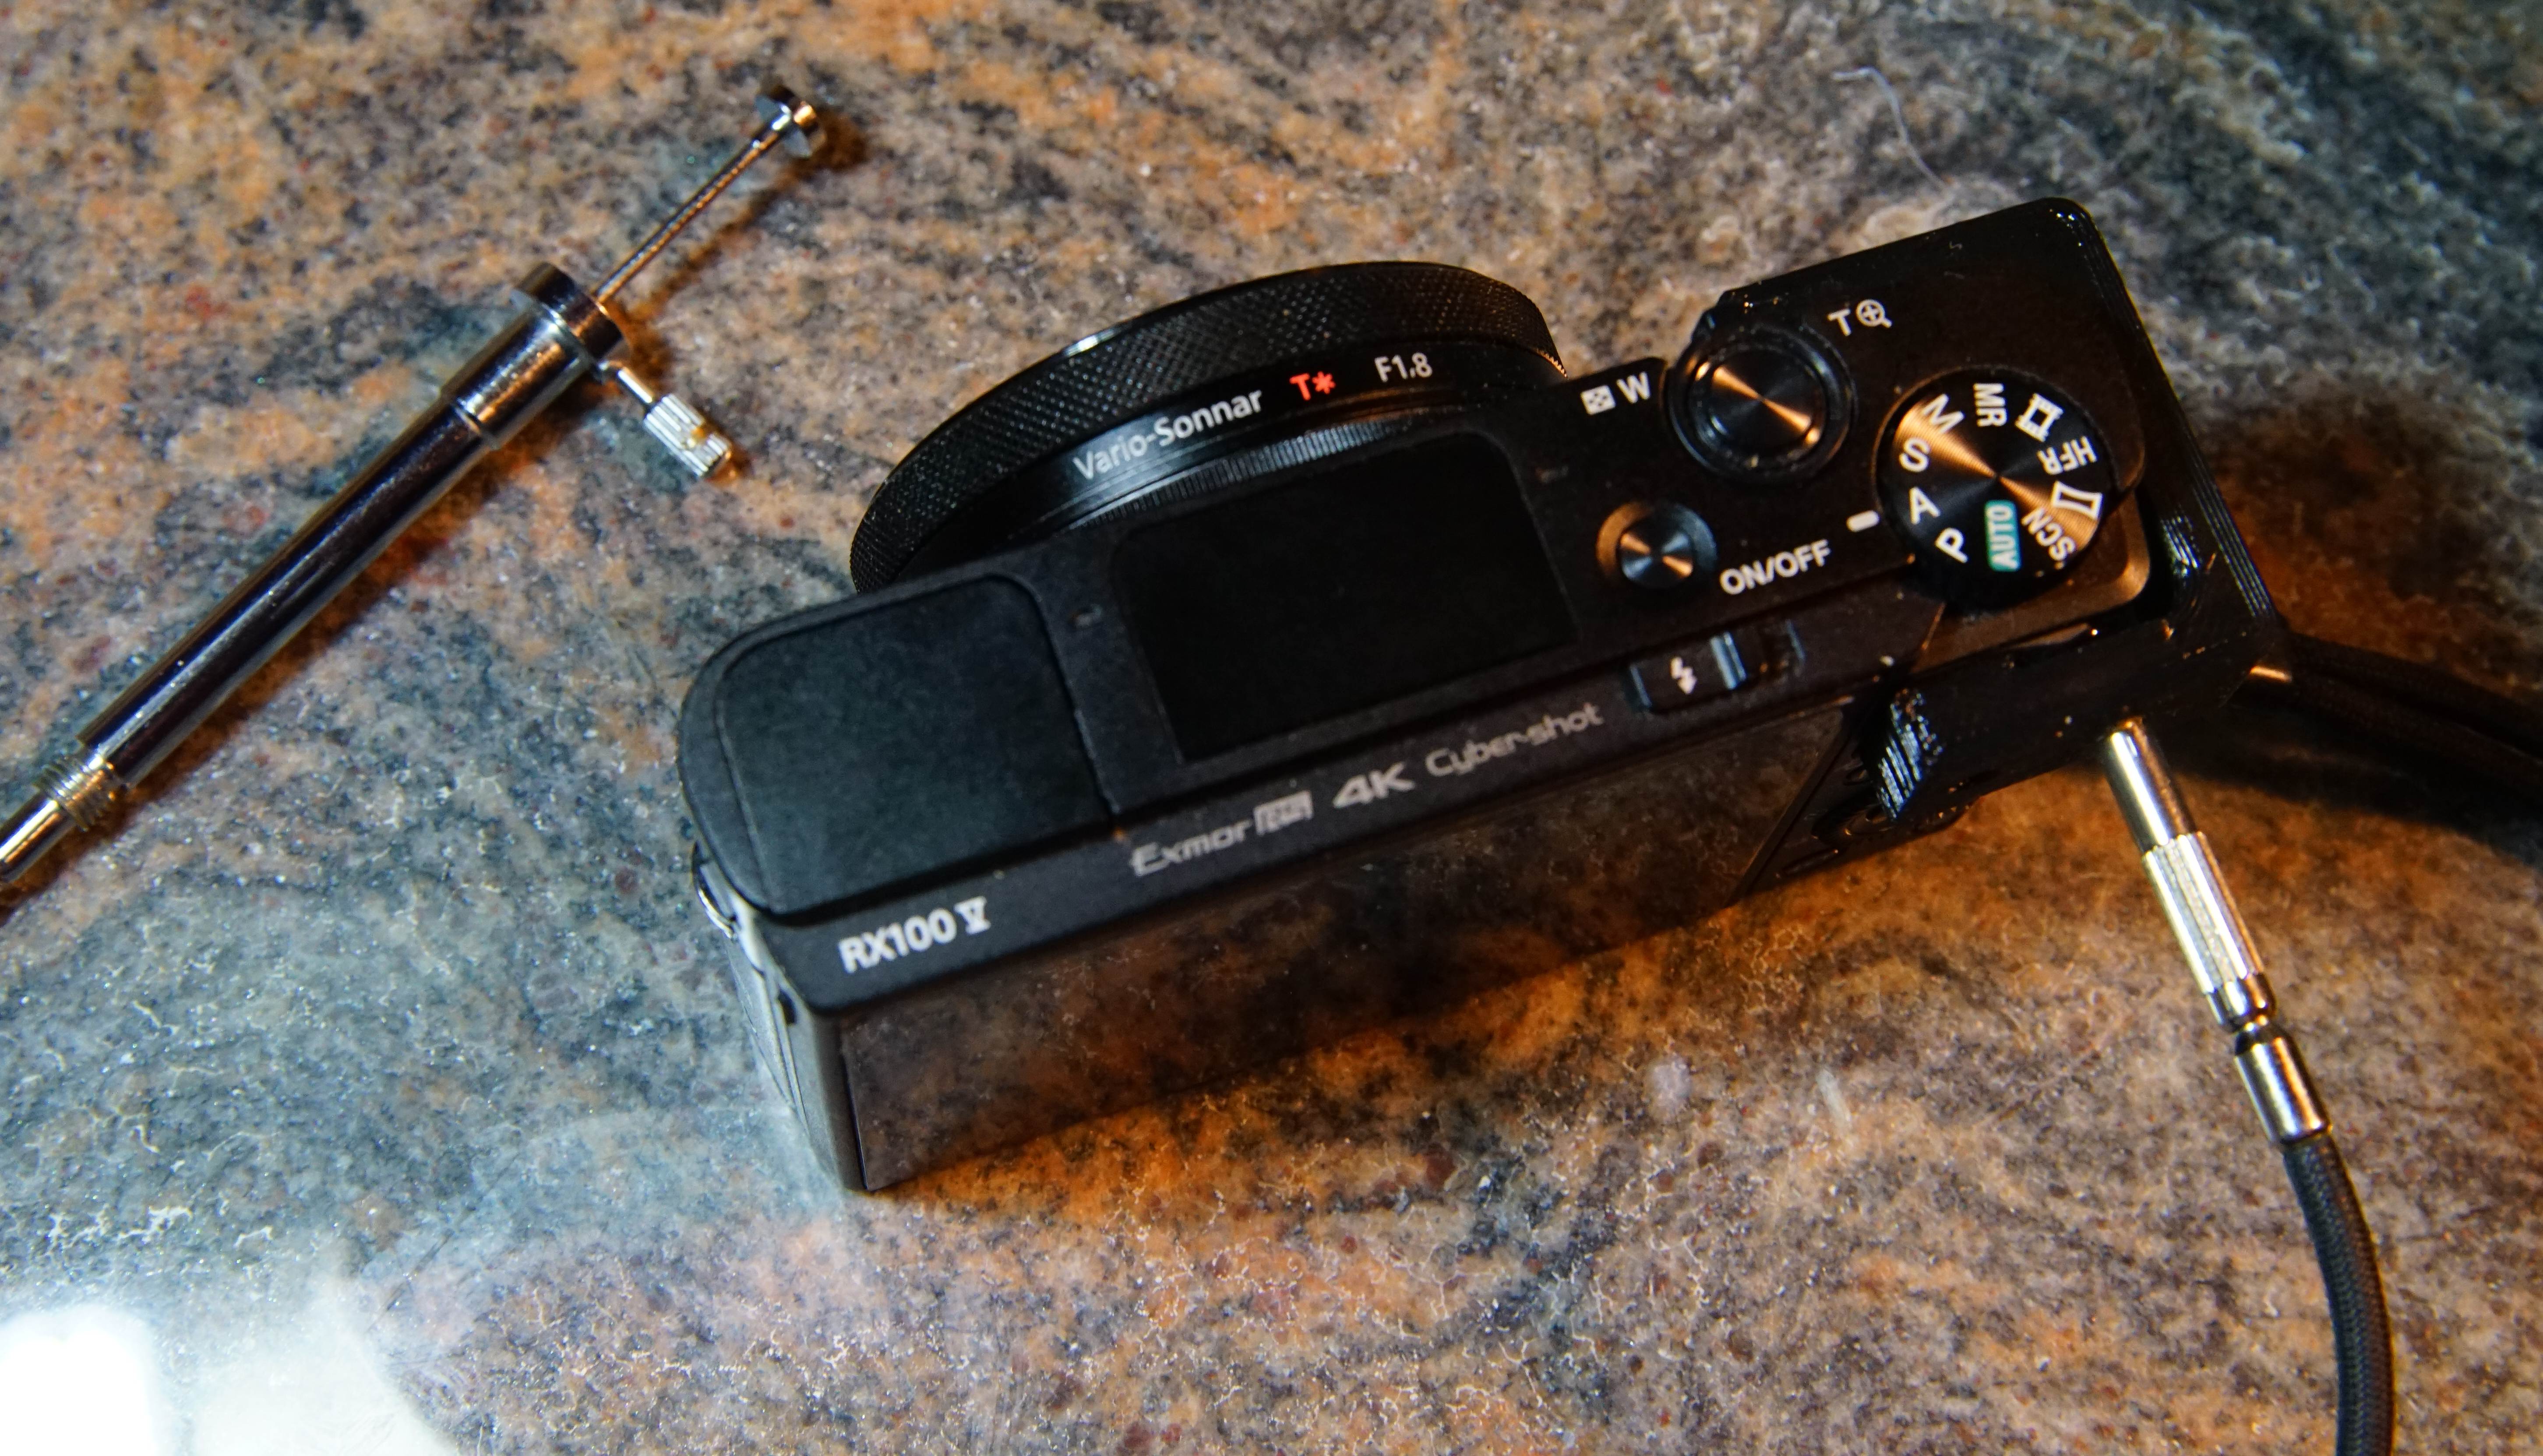 Sony RX100 remote wire release for movie button